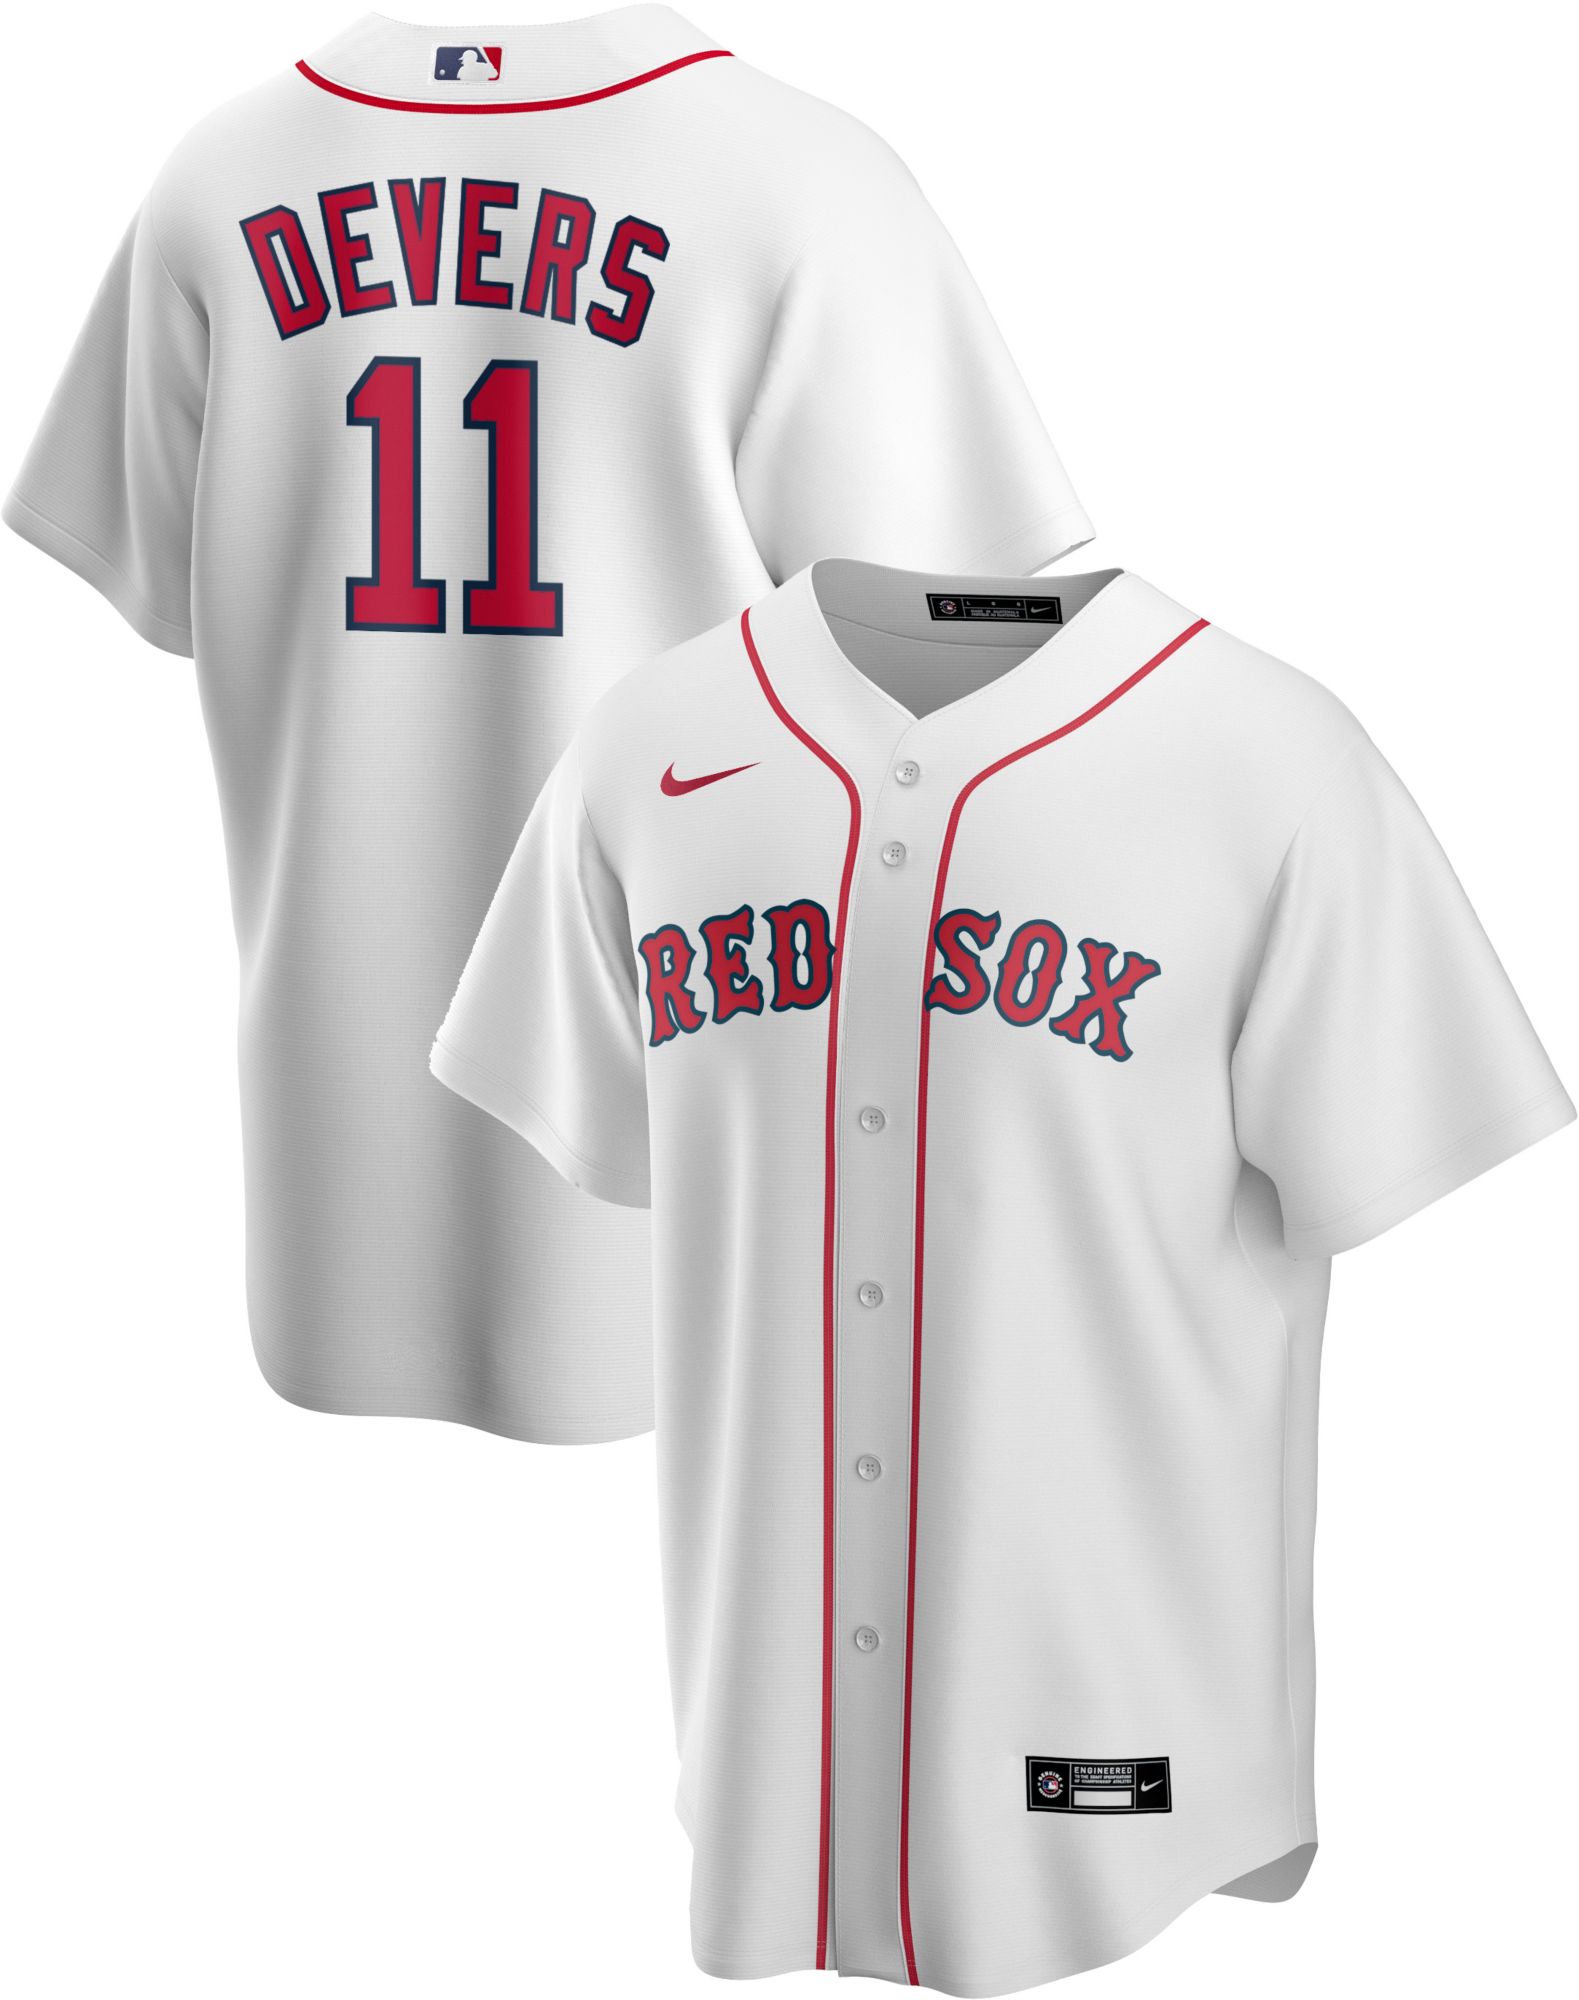 red sox jerseys for sale